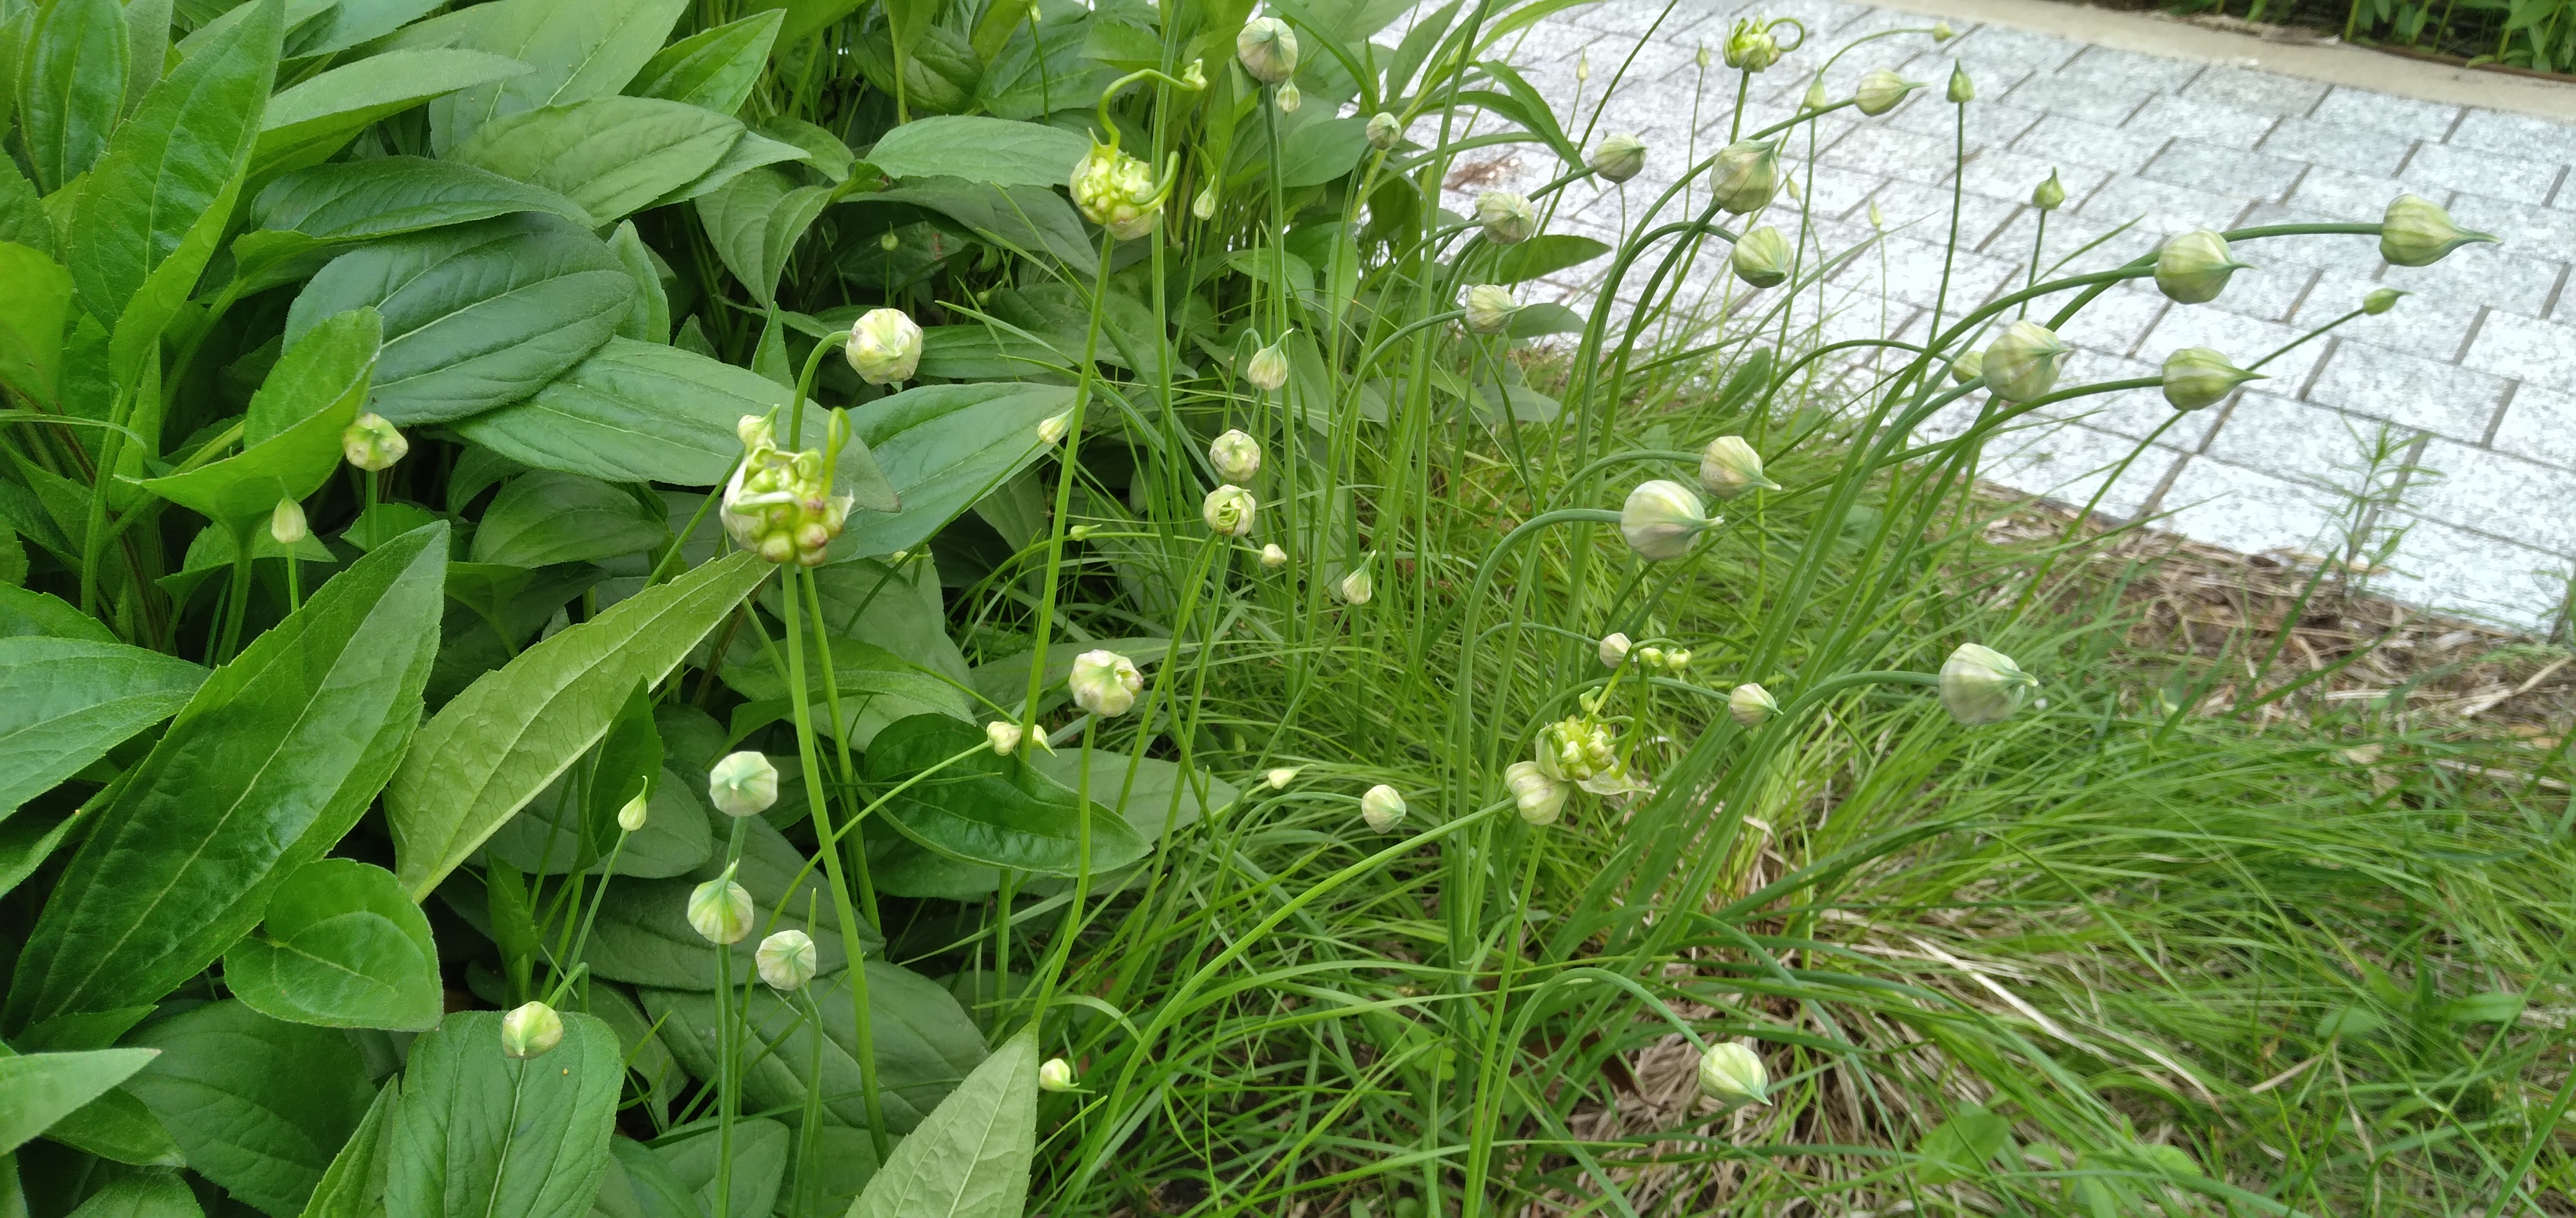 A plant with small, delicate white blooms